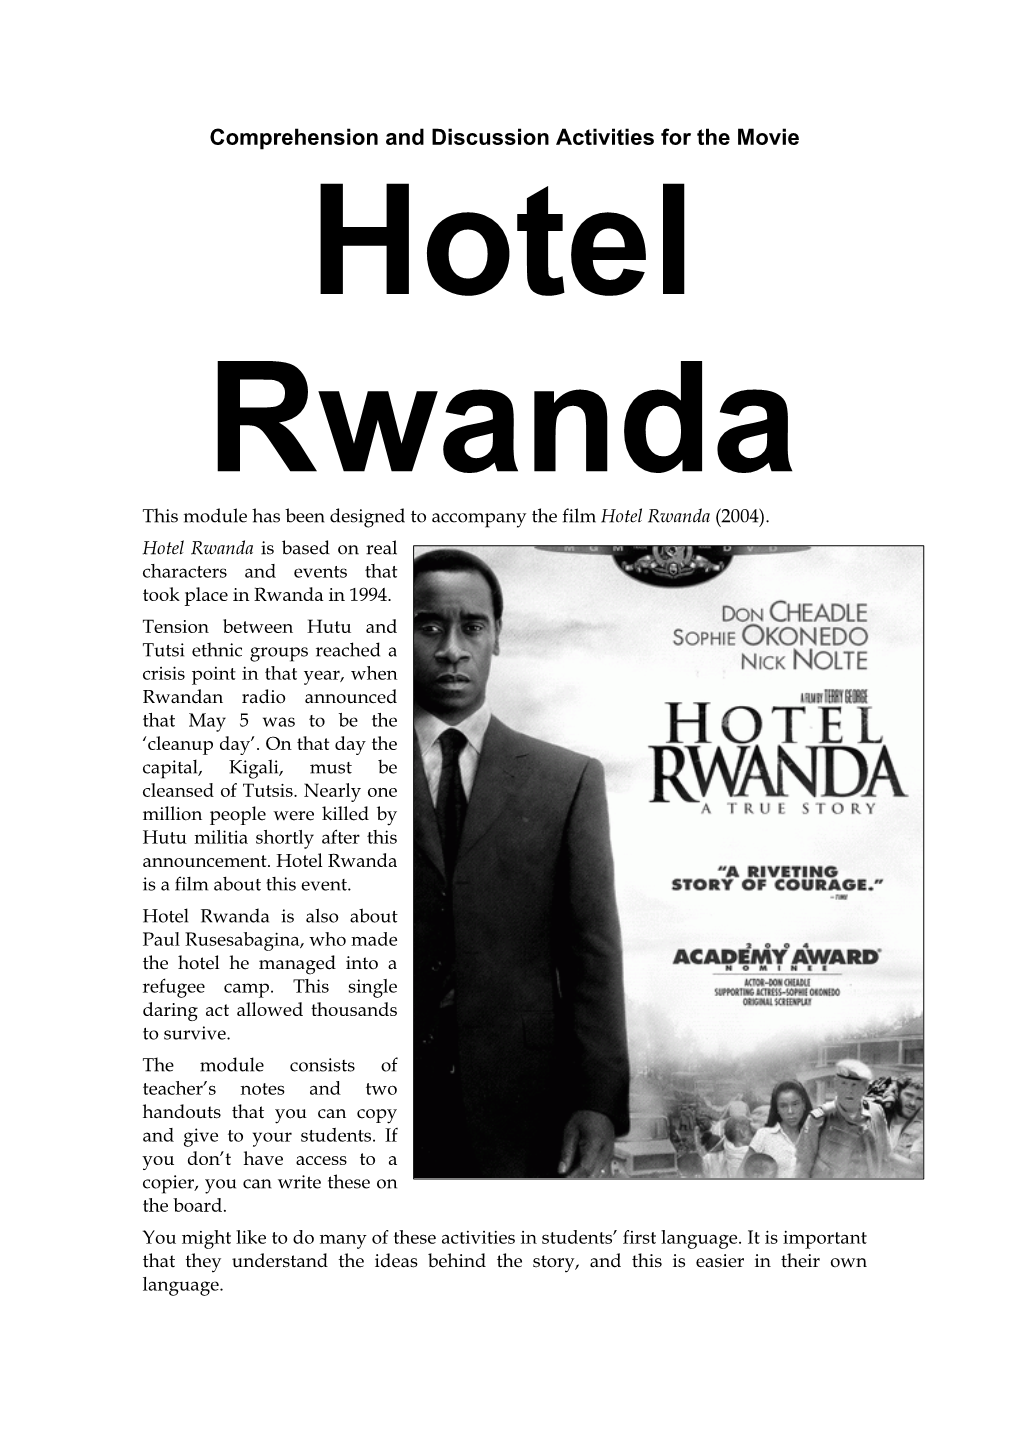 Comprehension and Discussion Activities for the Movie Hotel Rwanda This Module Has Been Designed to Accompany the Film Hotel Rwanda (2004)